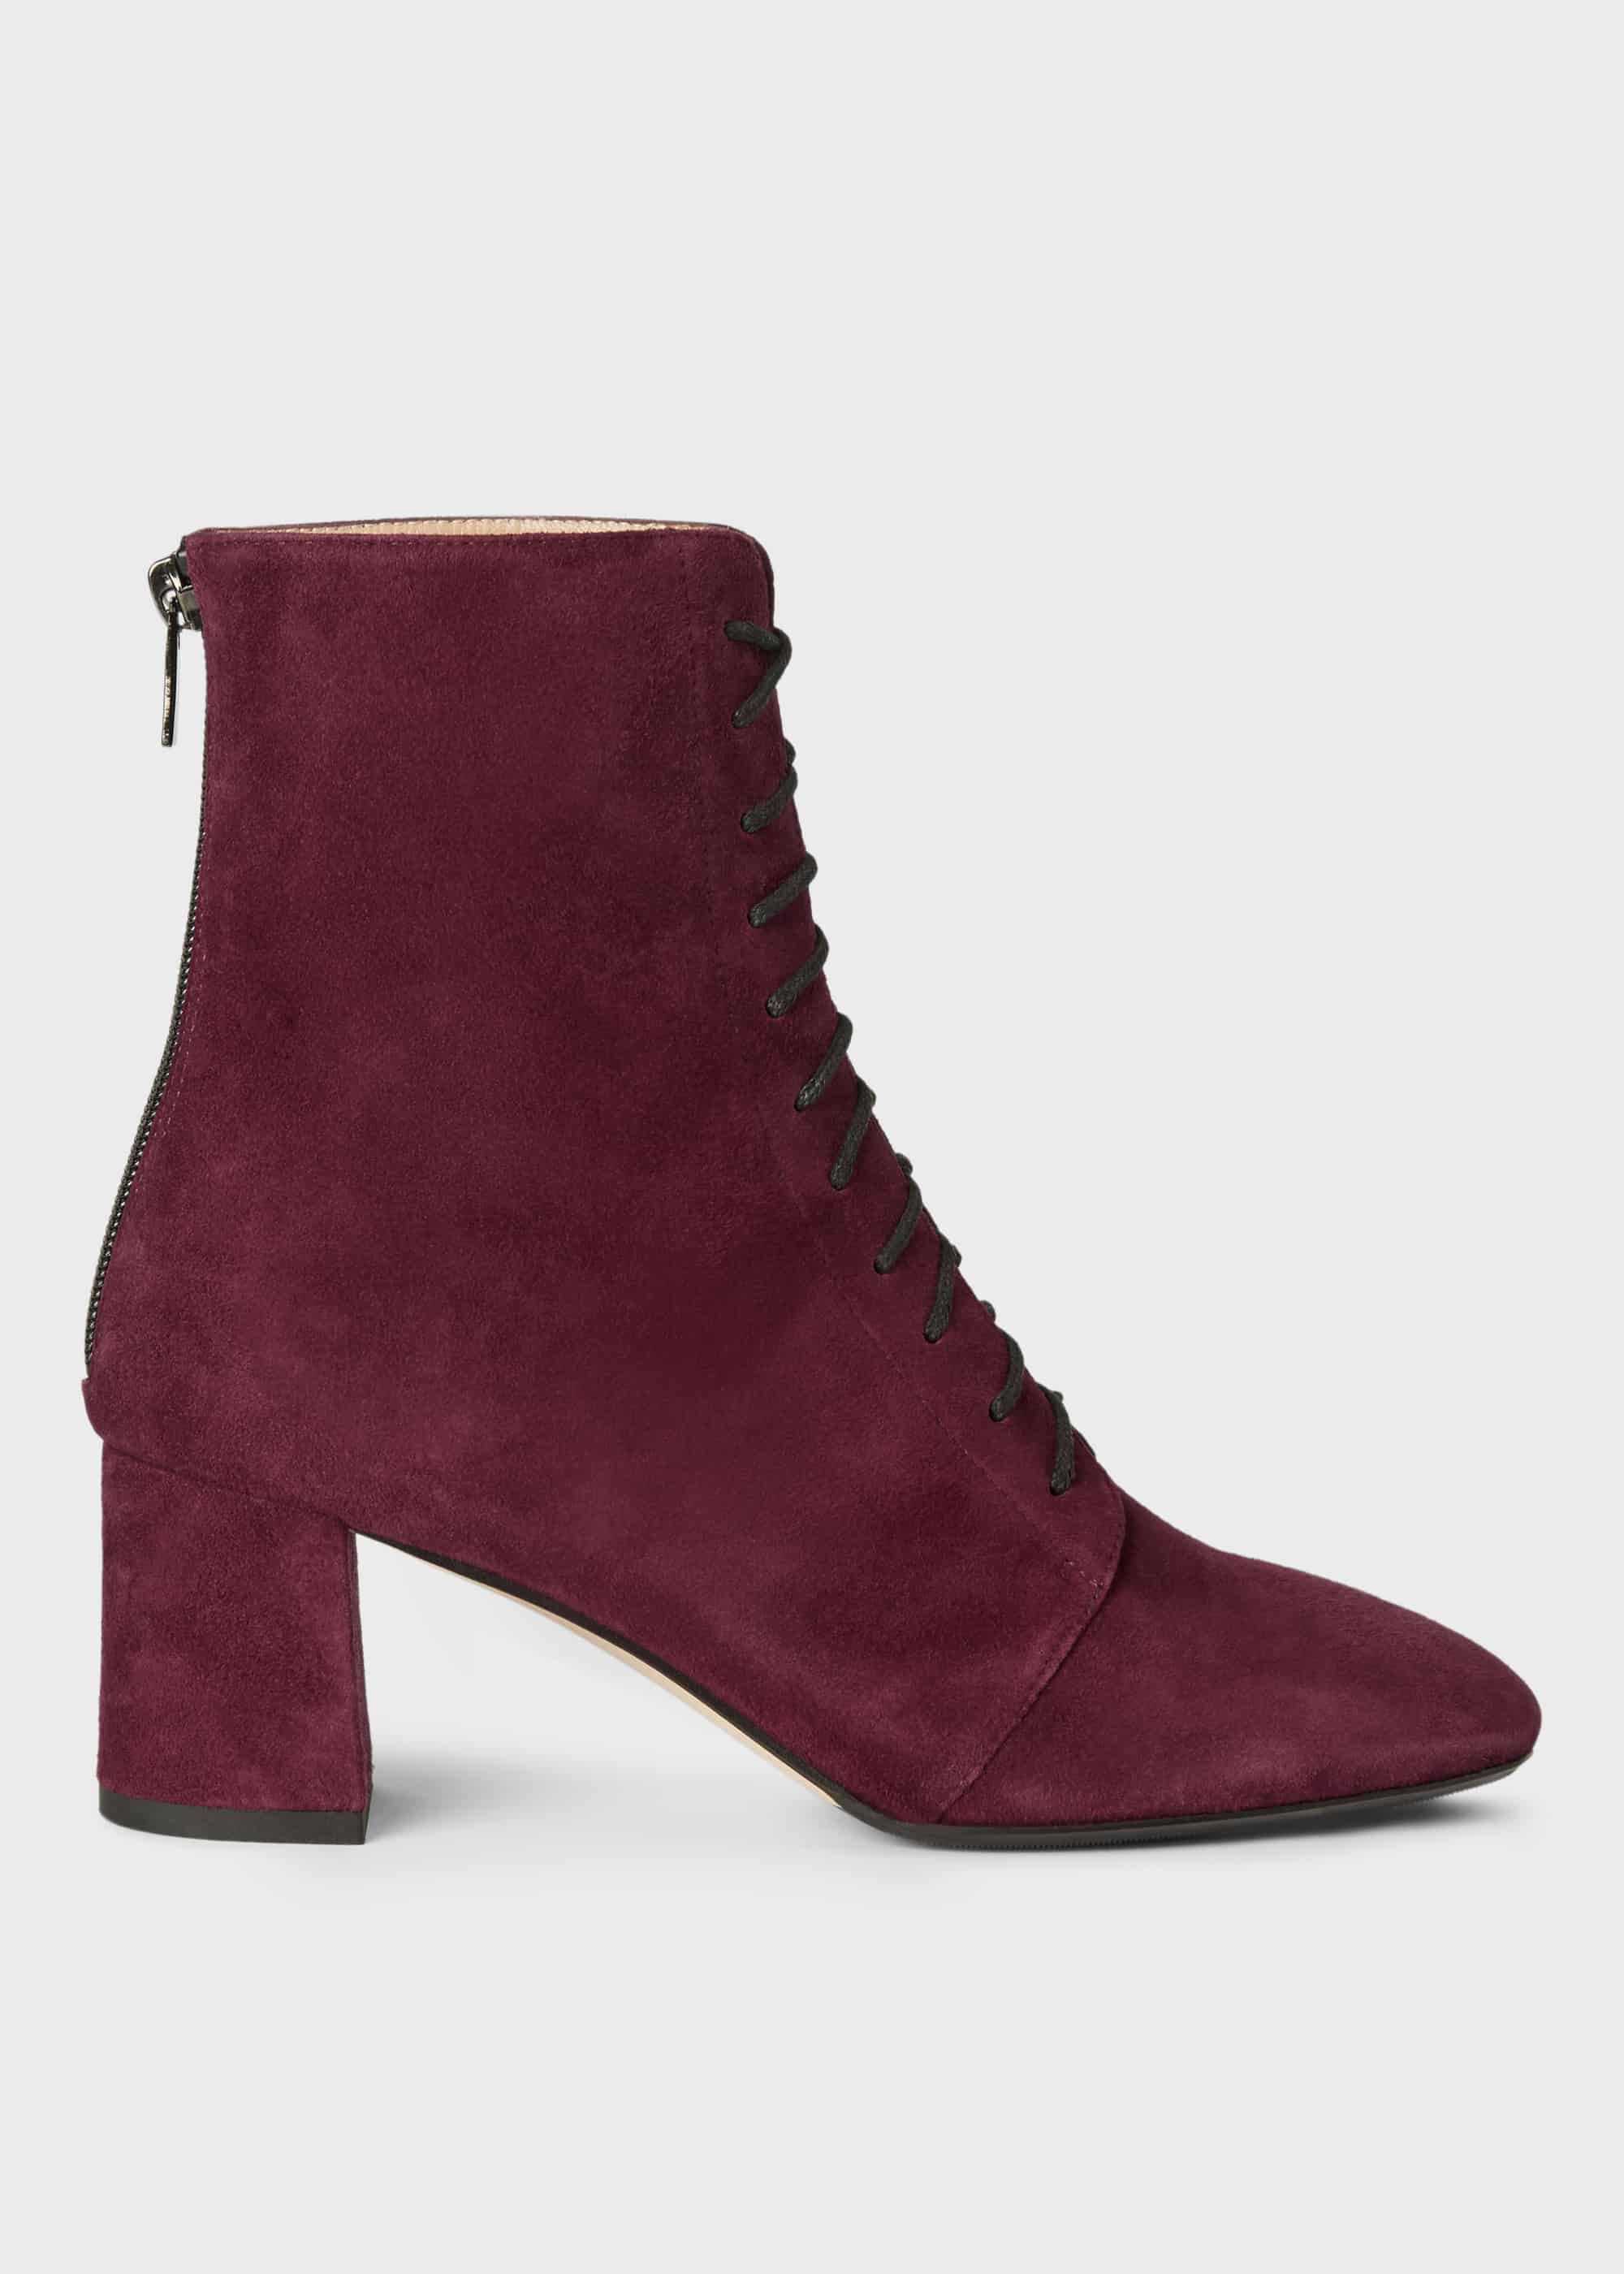 Imogen Lace Up Boot | Hobbs